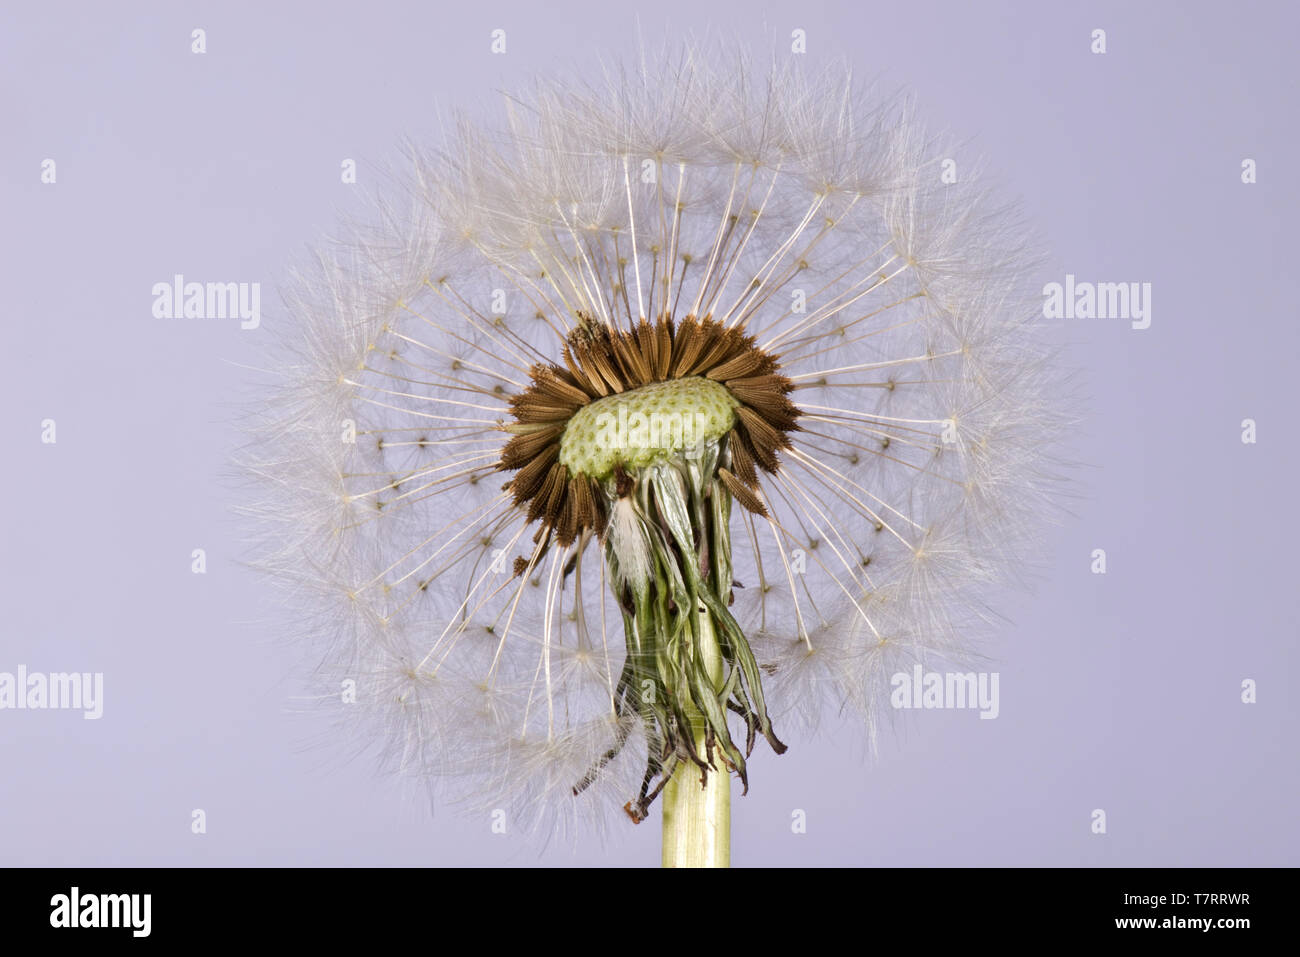 Studio image of a dandelion (Taraxacum officinale) seed head showing pappus, beak and achene for wind dispersal Stock Photo